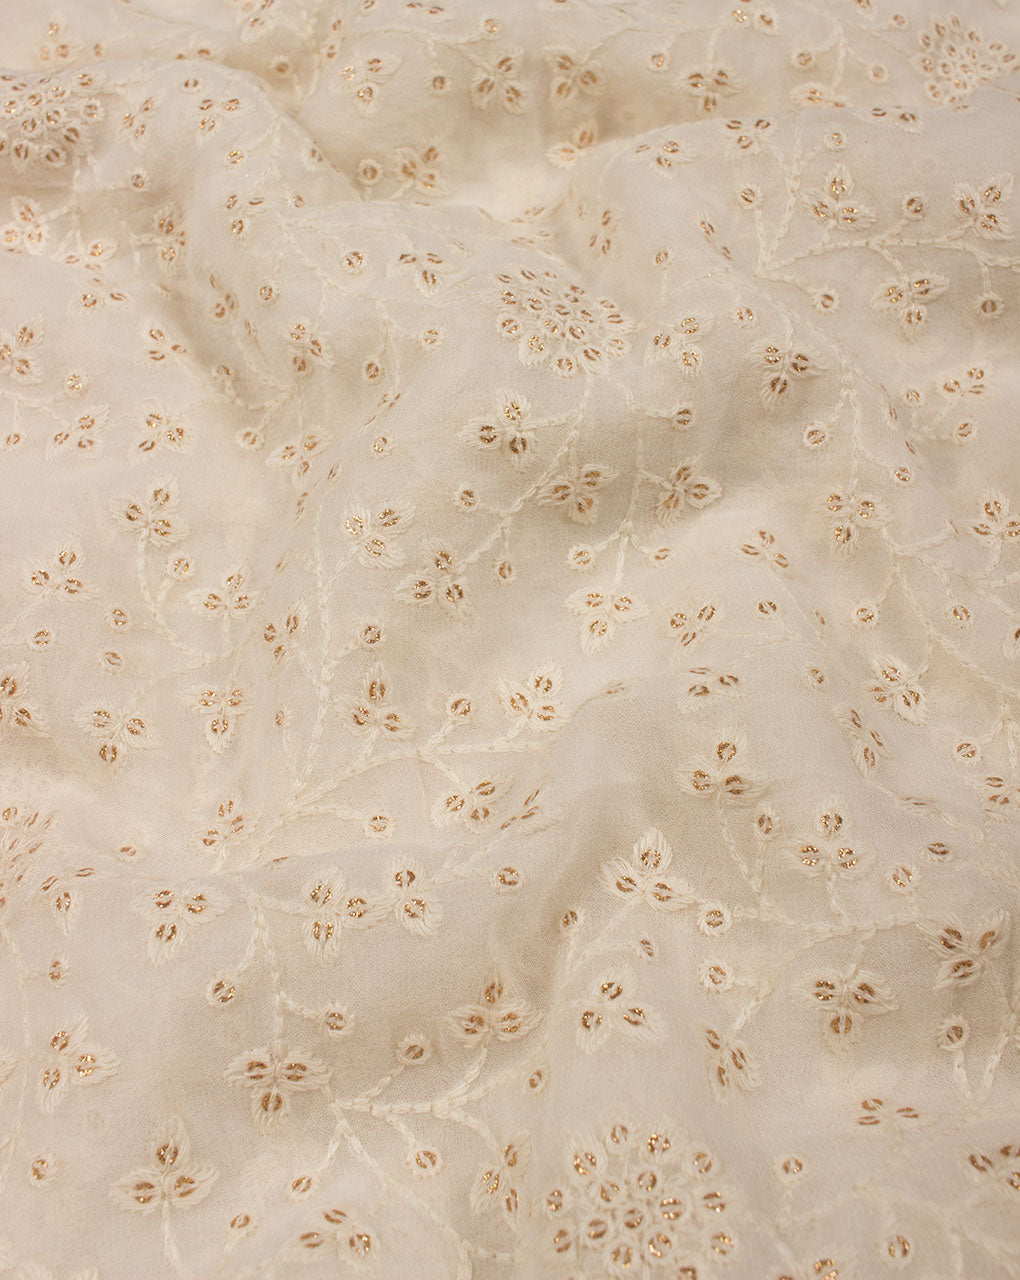 Embroidered Sequins Work Dyeable Viscose Georgette Fabric - Fabriclore.com